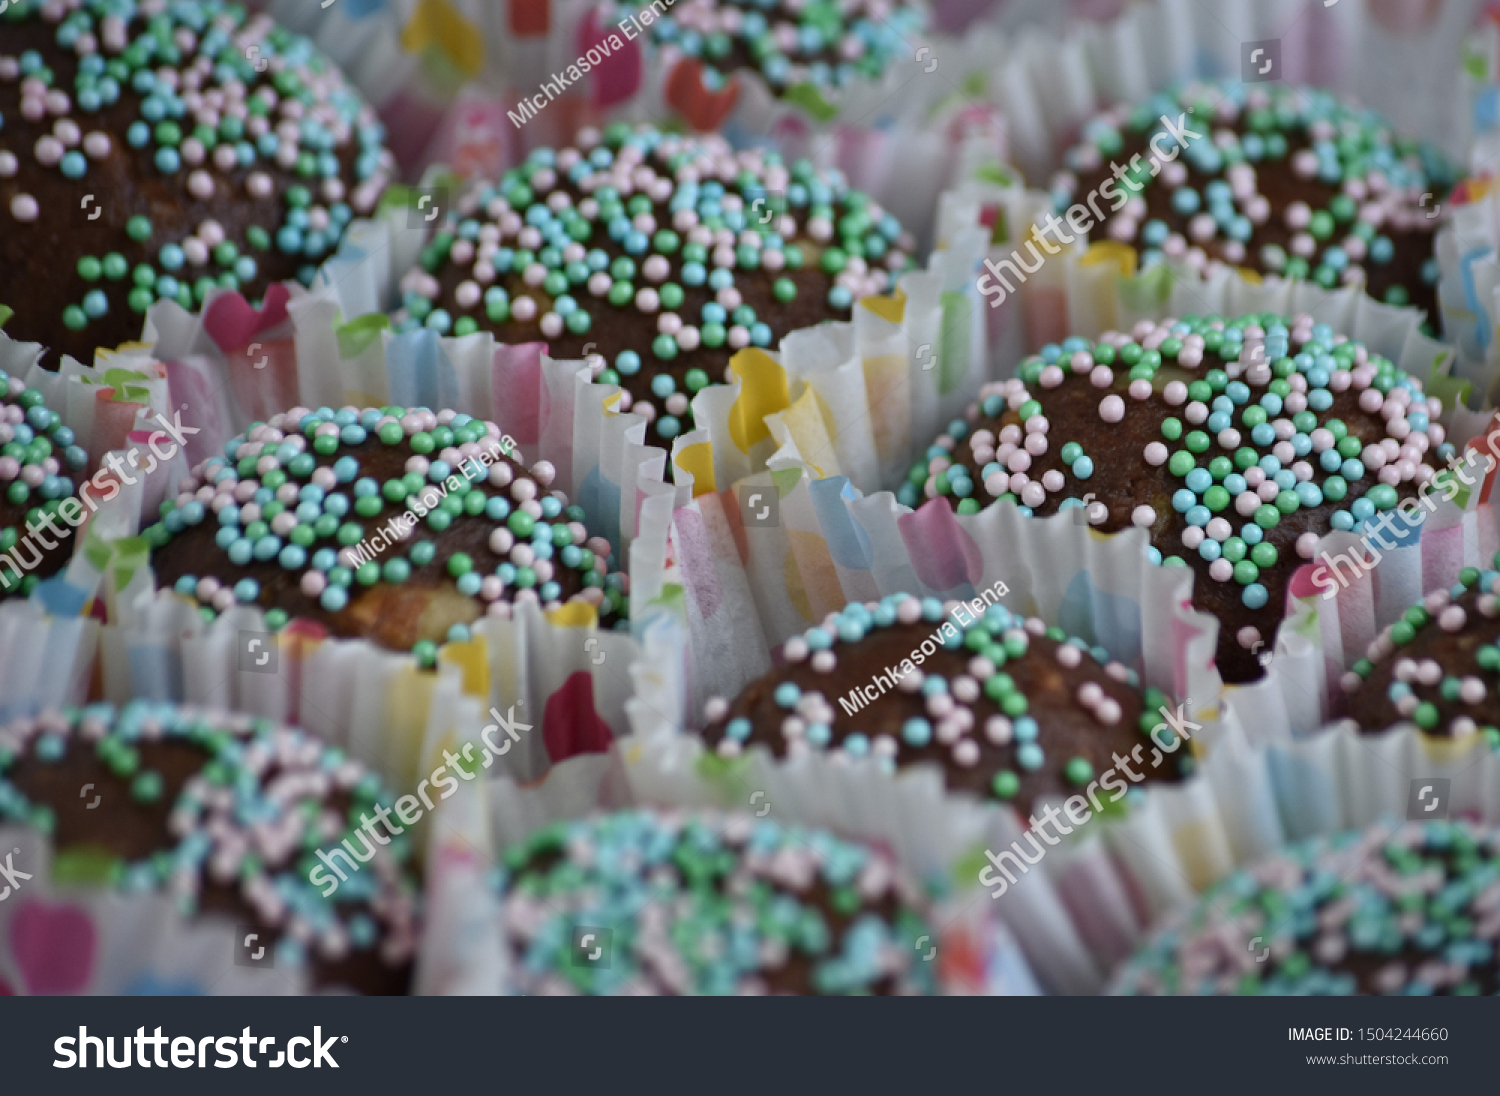 many sponge cakes covered with colored crumbs in paper packaging dessert desktop wallpapers #1504244660